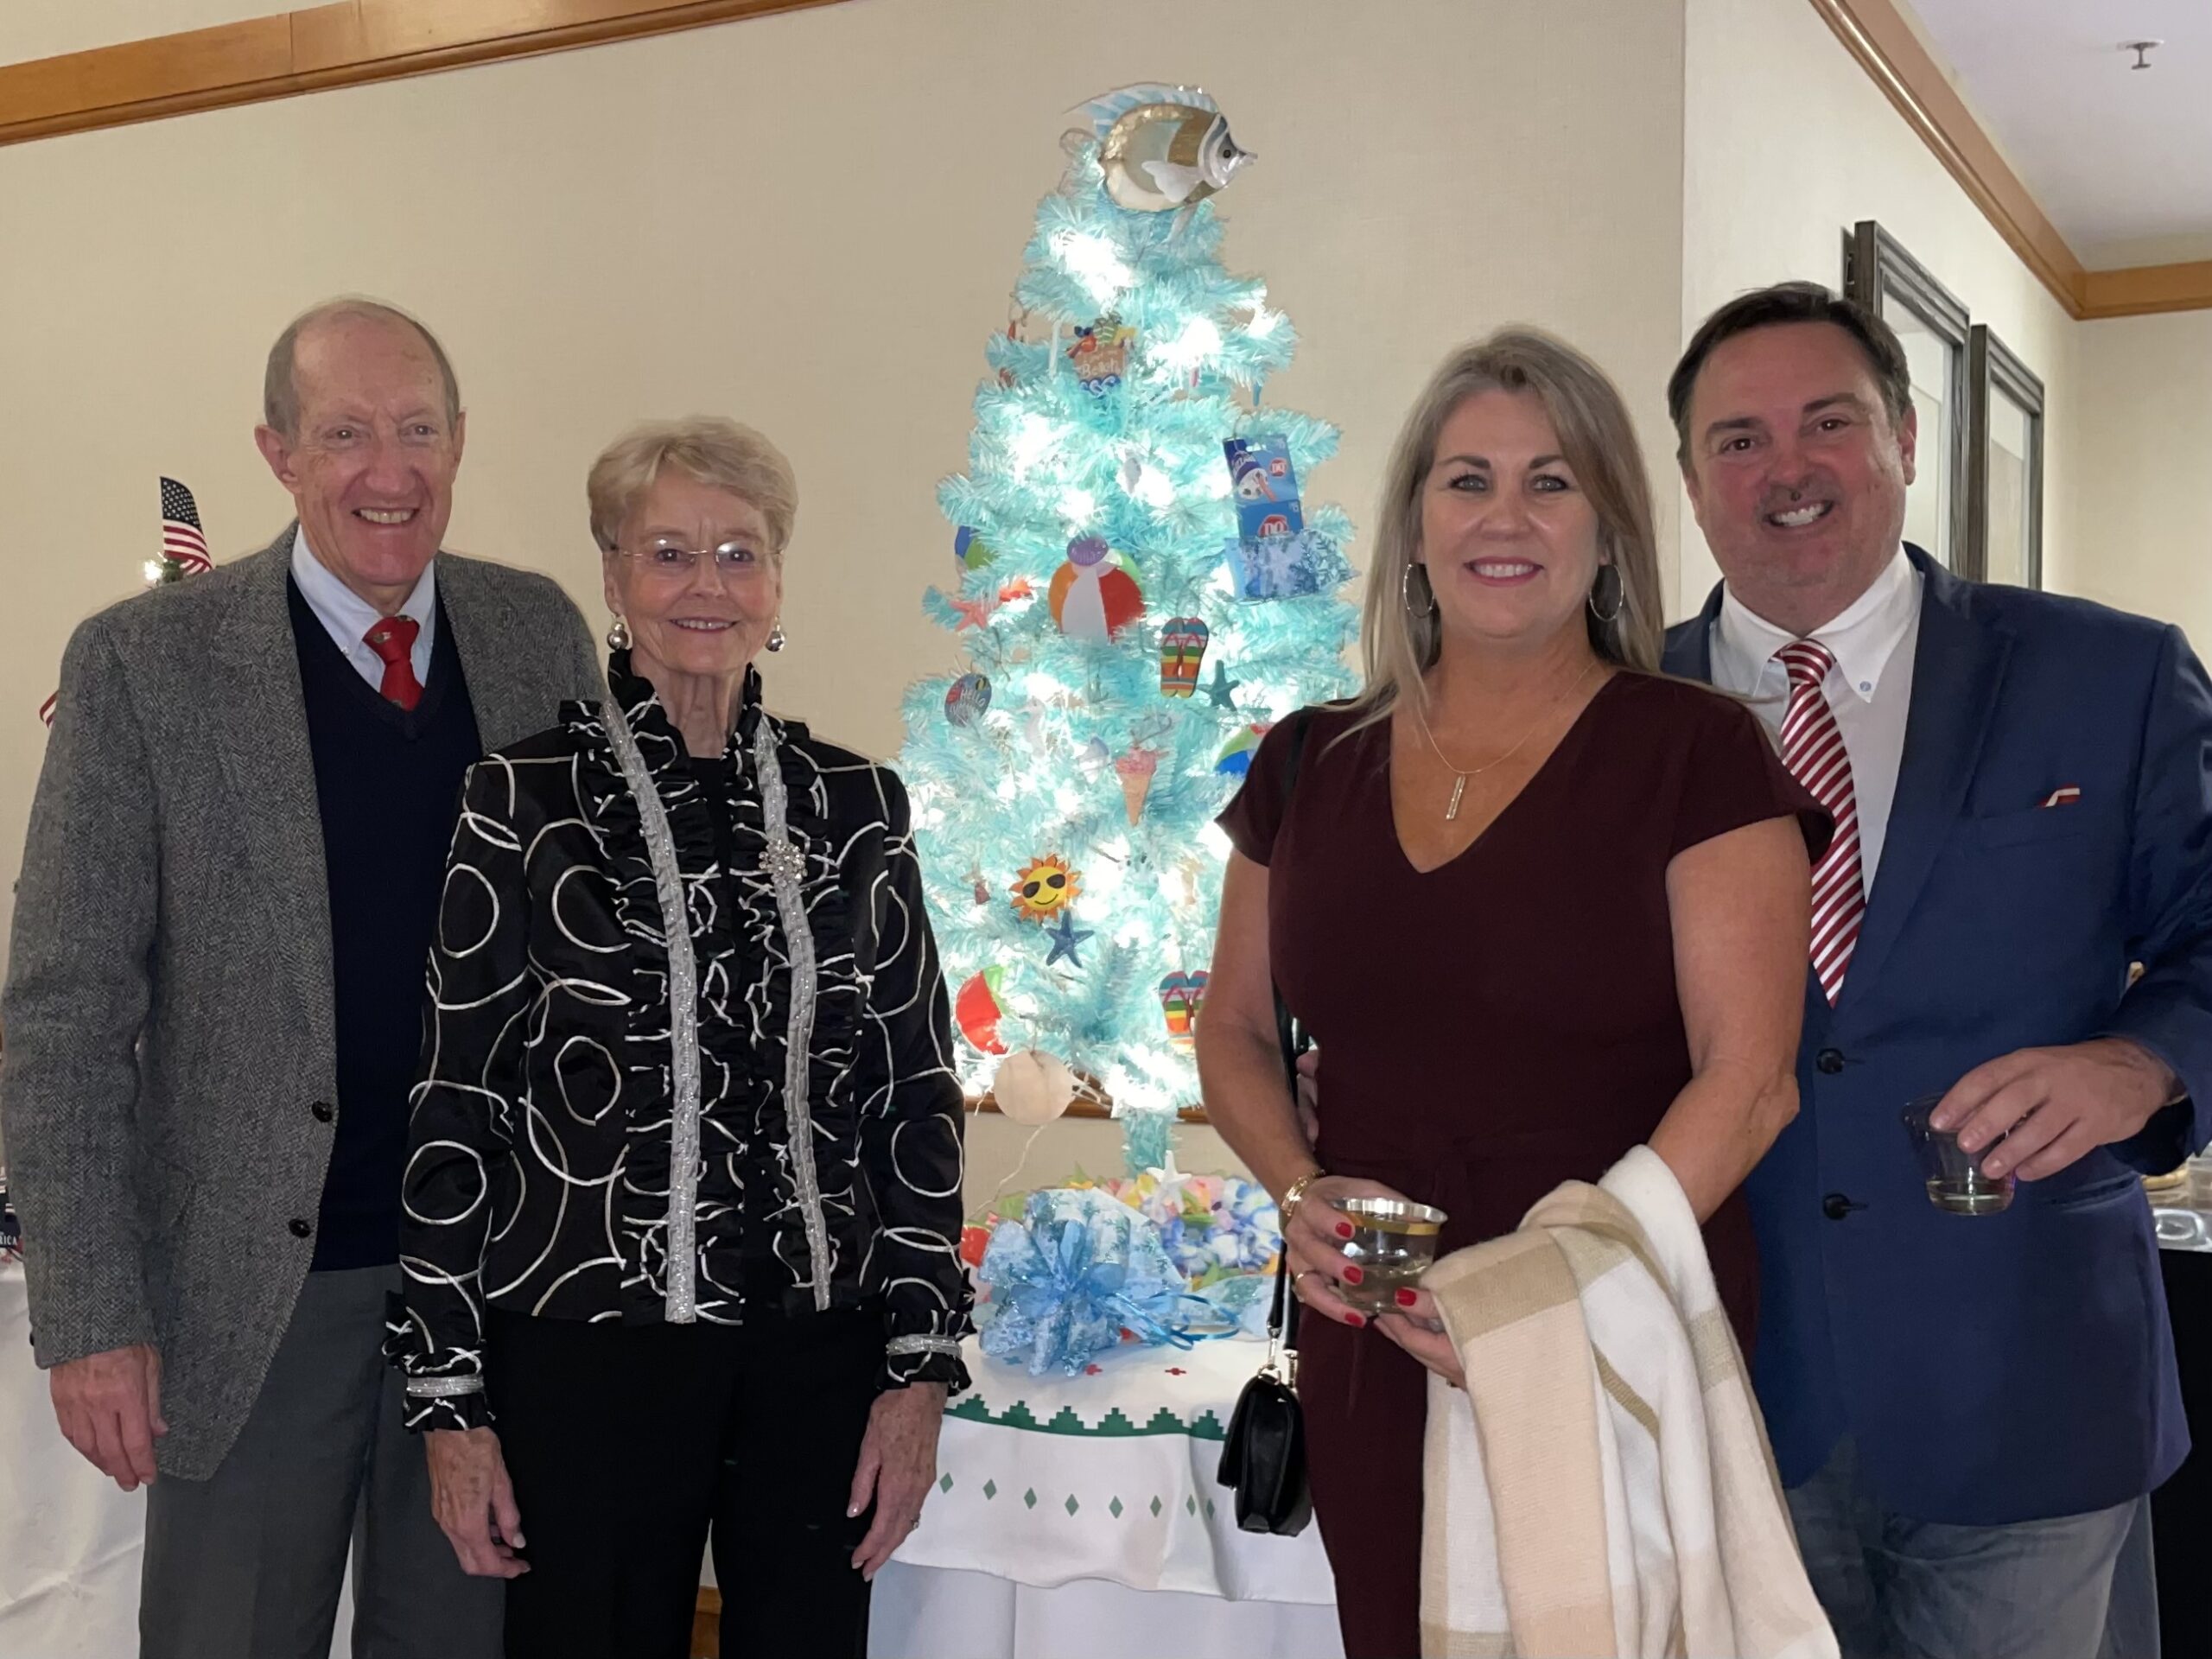 Group of People Smiling in Front of a Small Christmas Tree